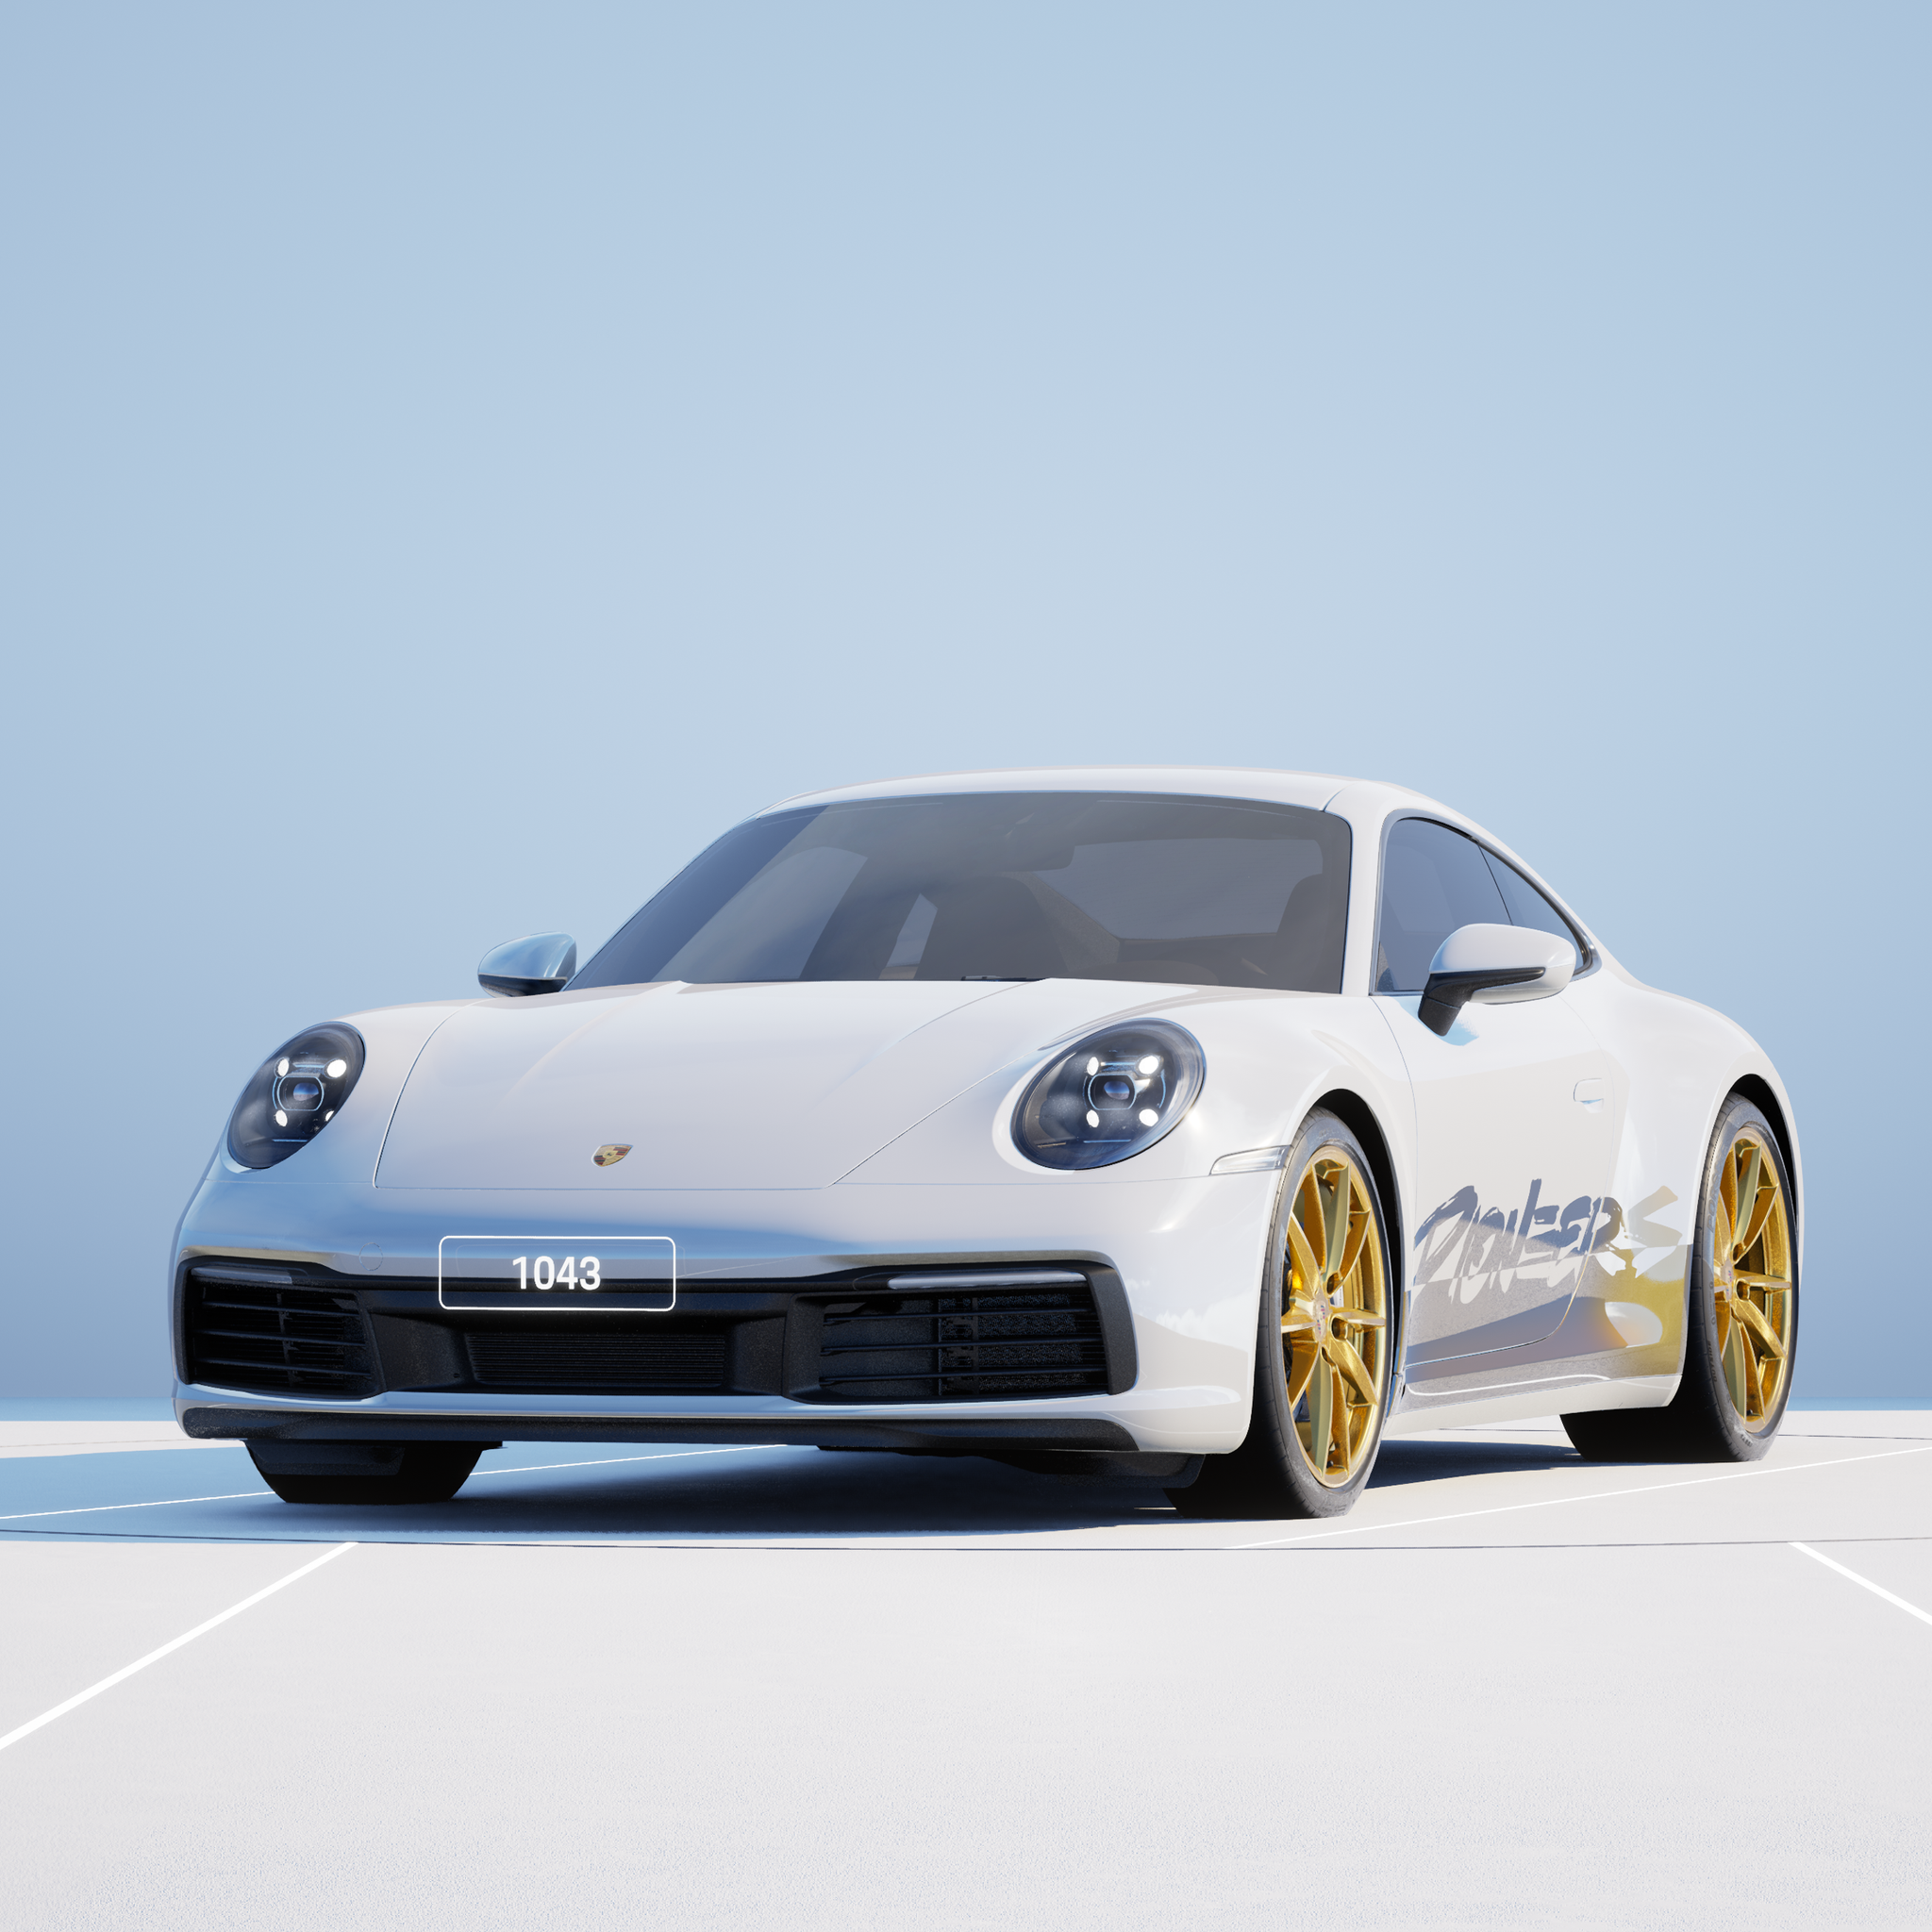 The PORSCHΞ 911 1043 image in phase